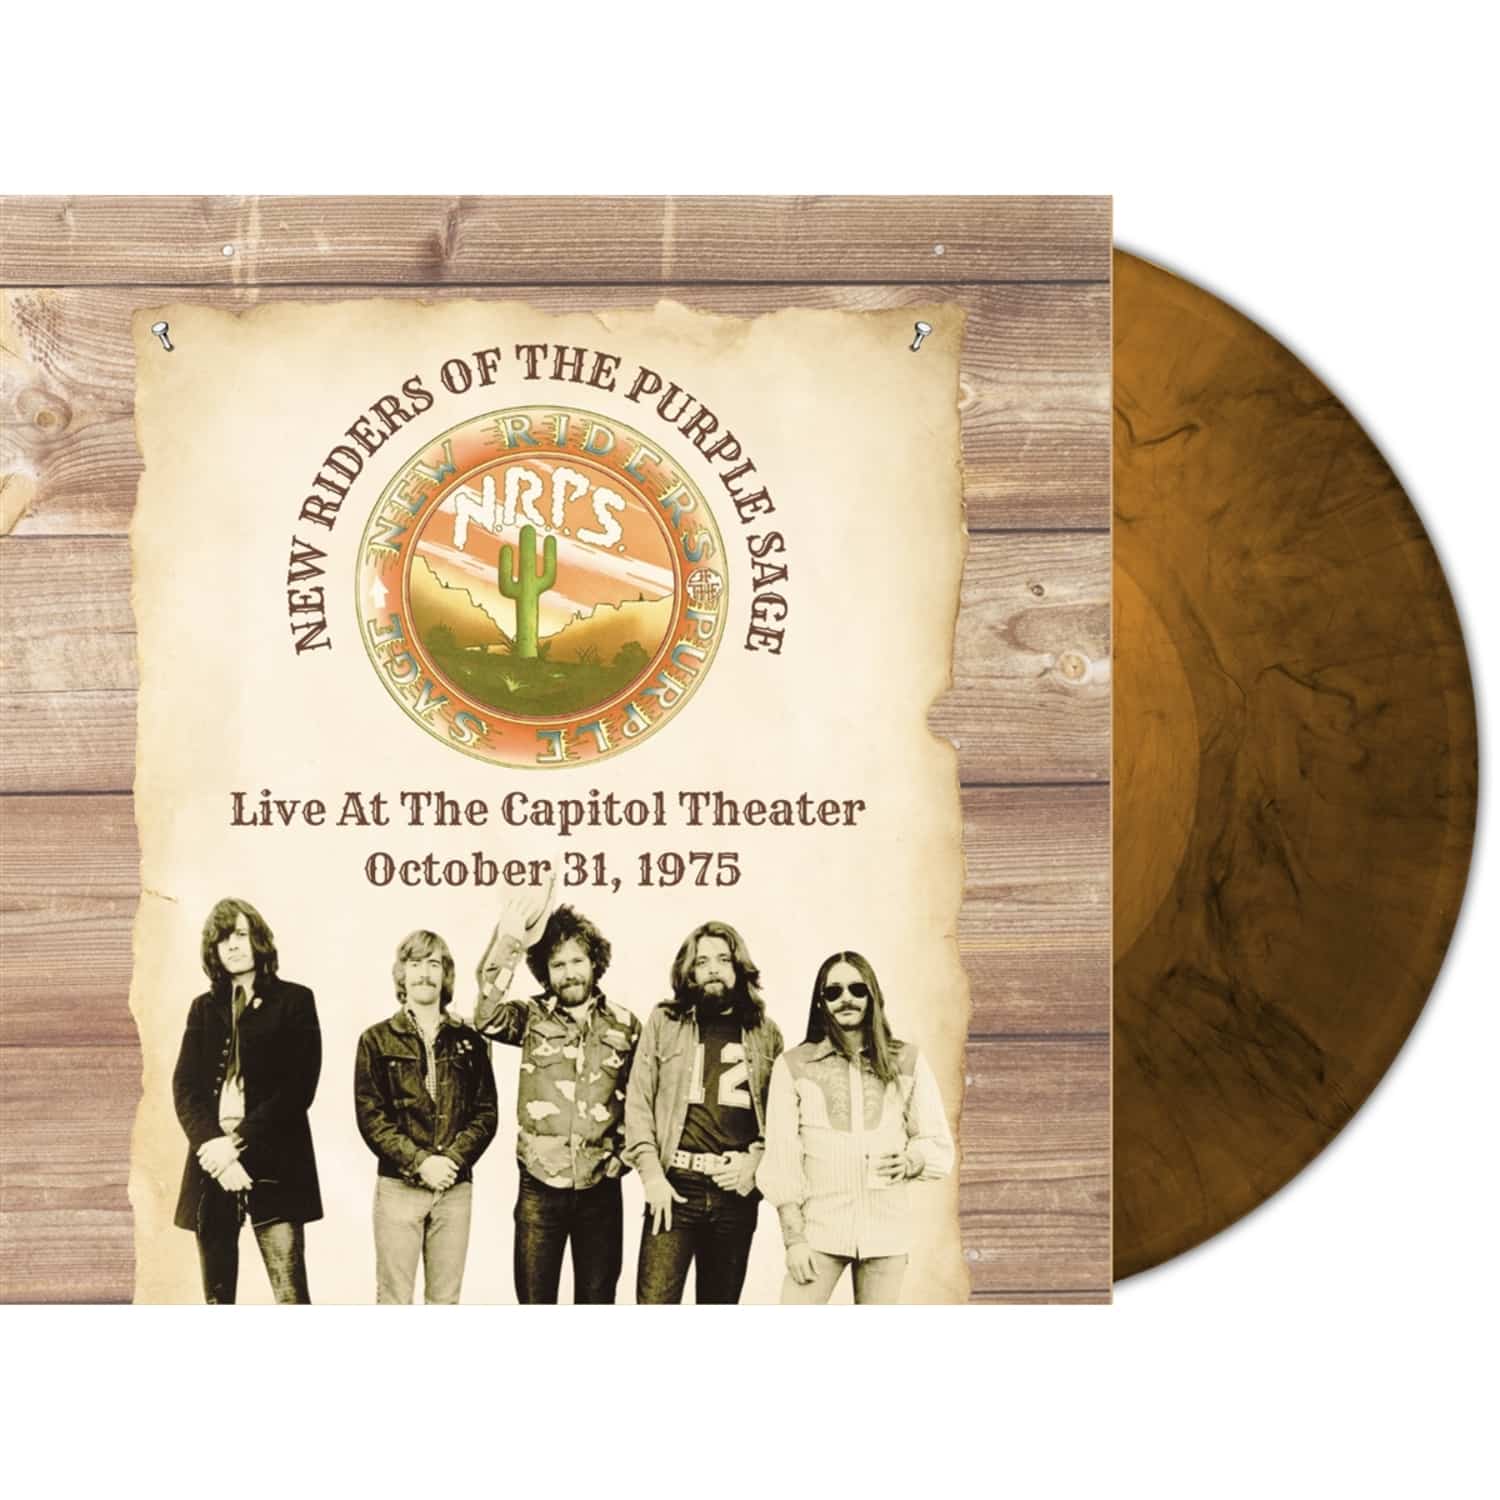 New Riders Of The Purple Sage - LIVE AT THE CAPITOL THEATER 